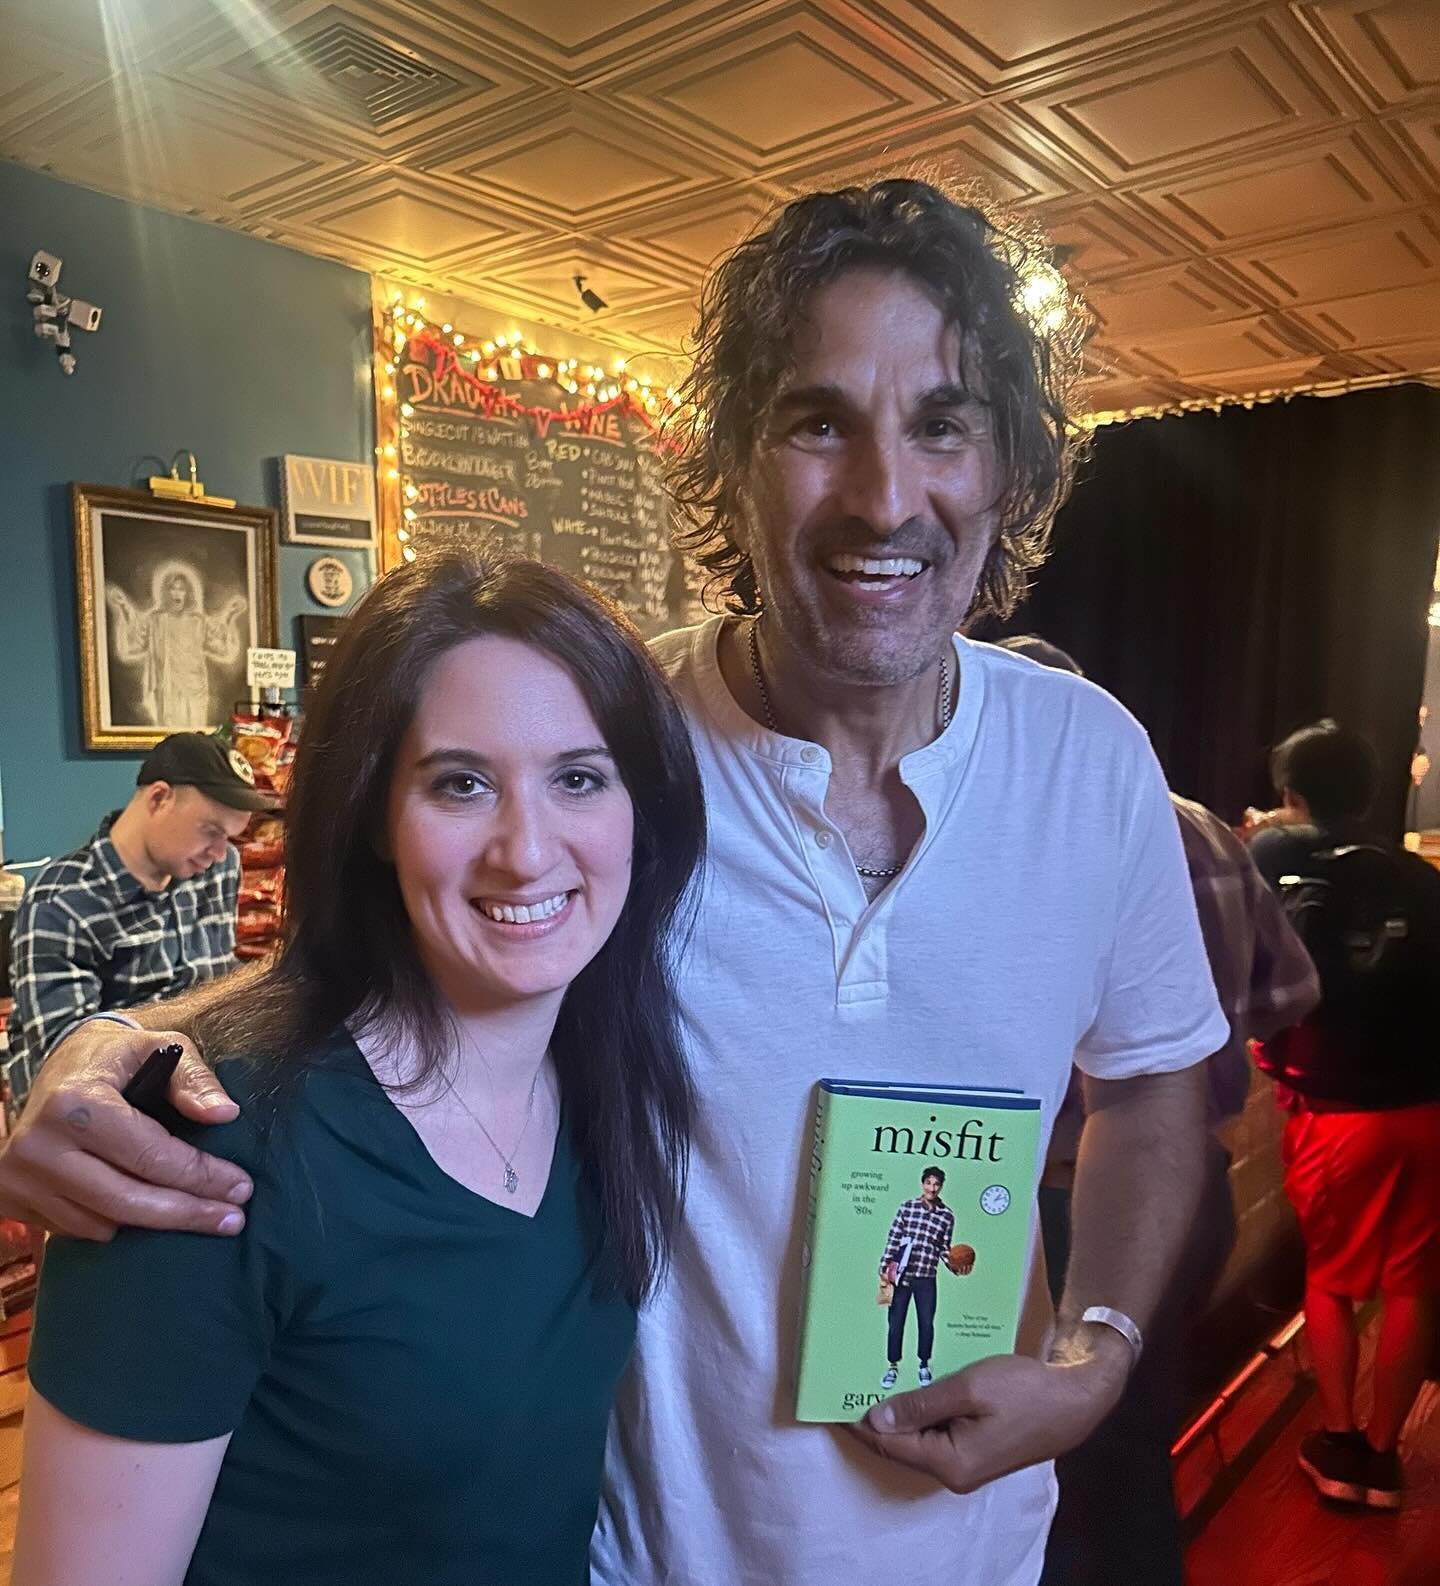 Saw and got to meet (!!) @garygulman at @qedastoria last night. Not only is he a talented and amazing comedian, but he has also been incredibly vulnerable in discussing his own mental health journey. 

If you haven&rsquo;t seen his special, The Great